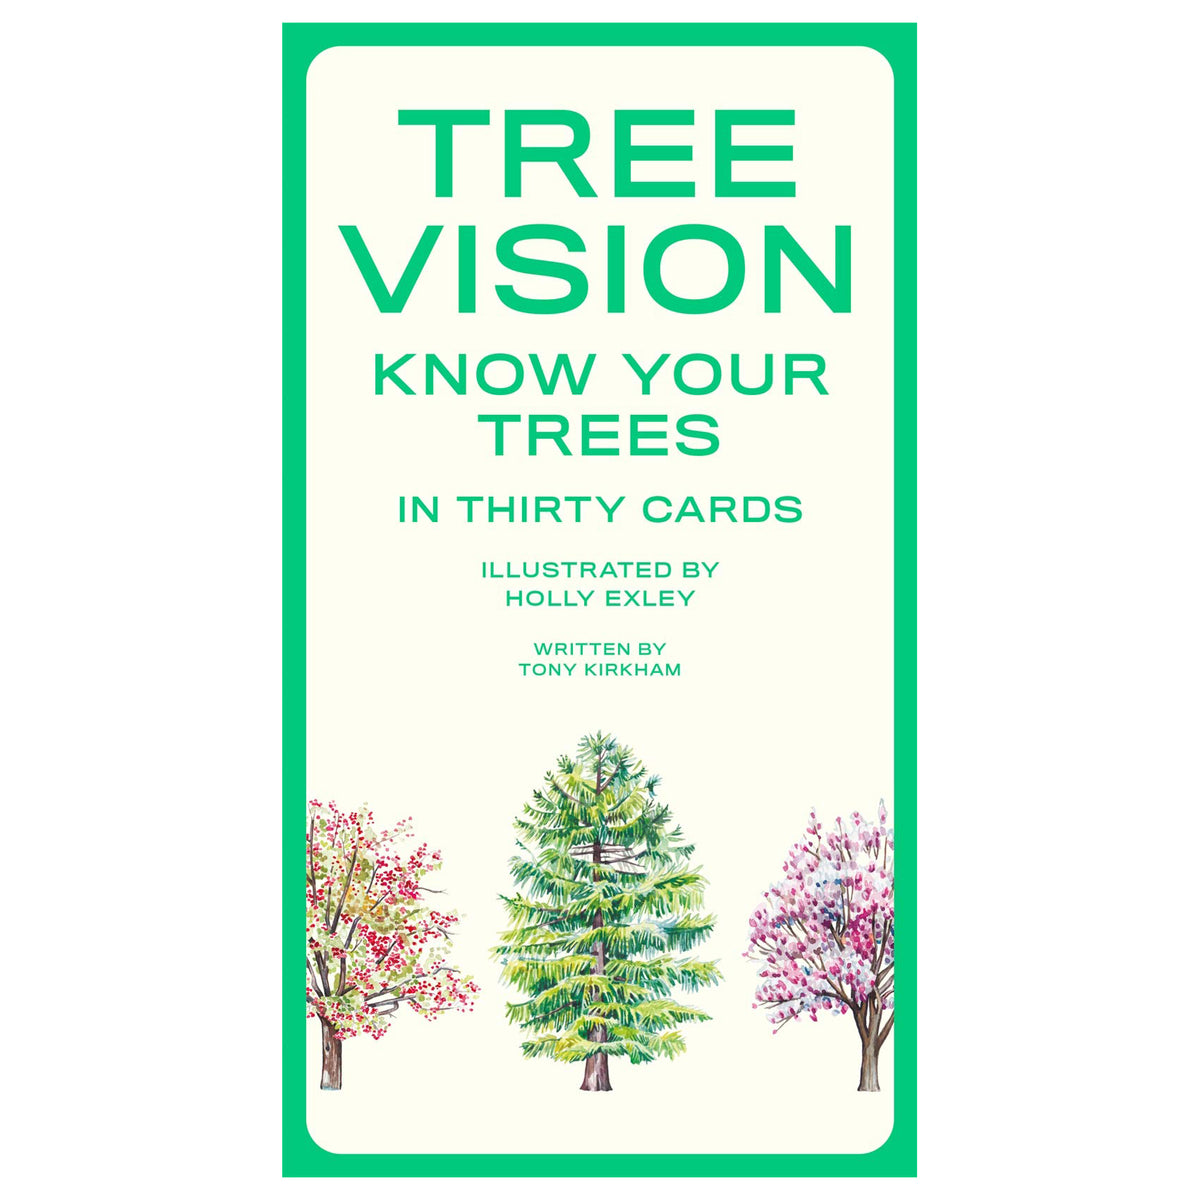 Tree Vision Know Your Trees in Thirty Cards